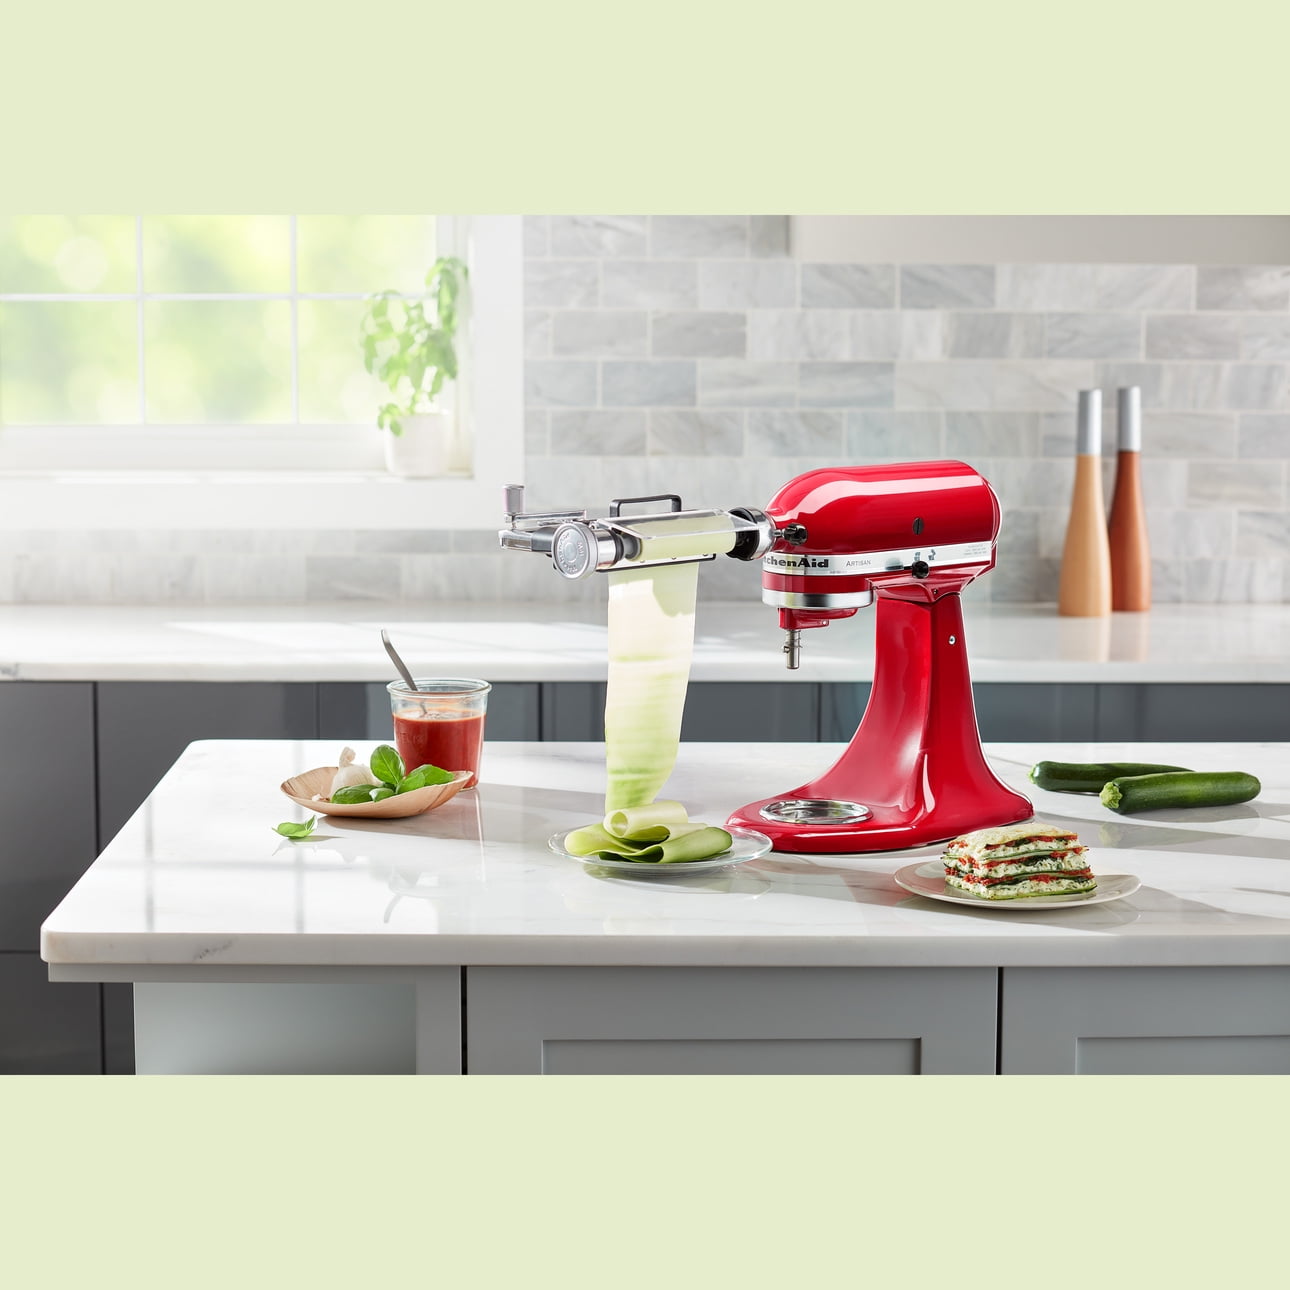 Williams-Sonoma - Holiday Gift Guide 2017 - KitchenAid(R) Vegetable Sheet  Cutter Attachment